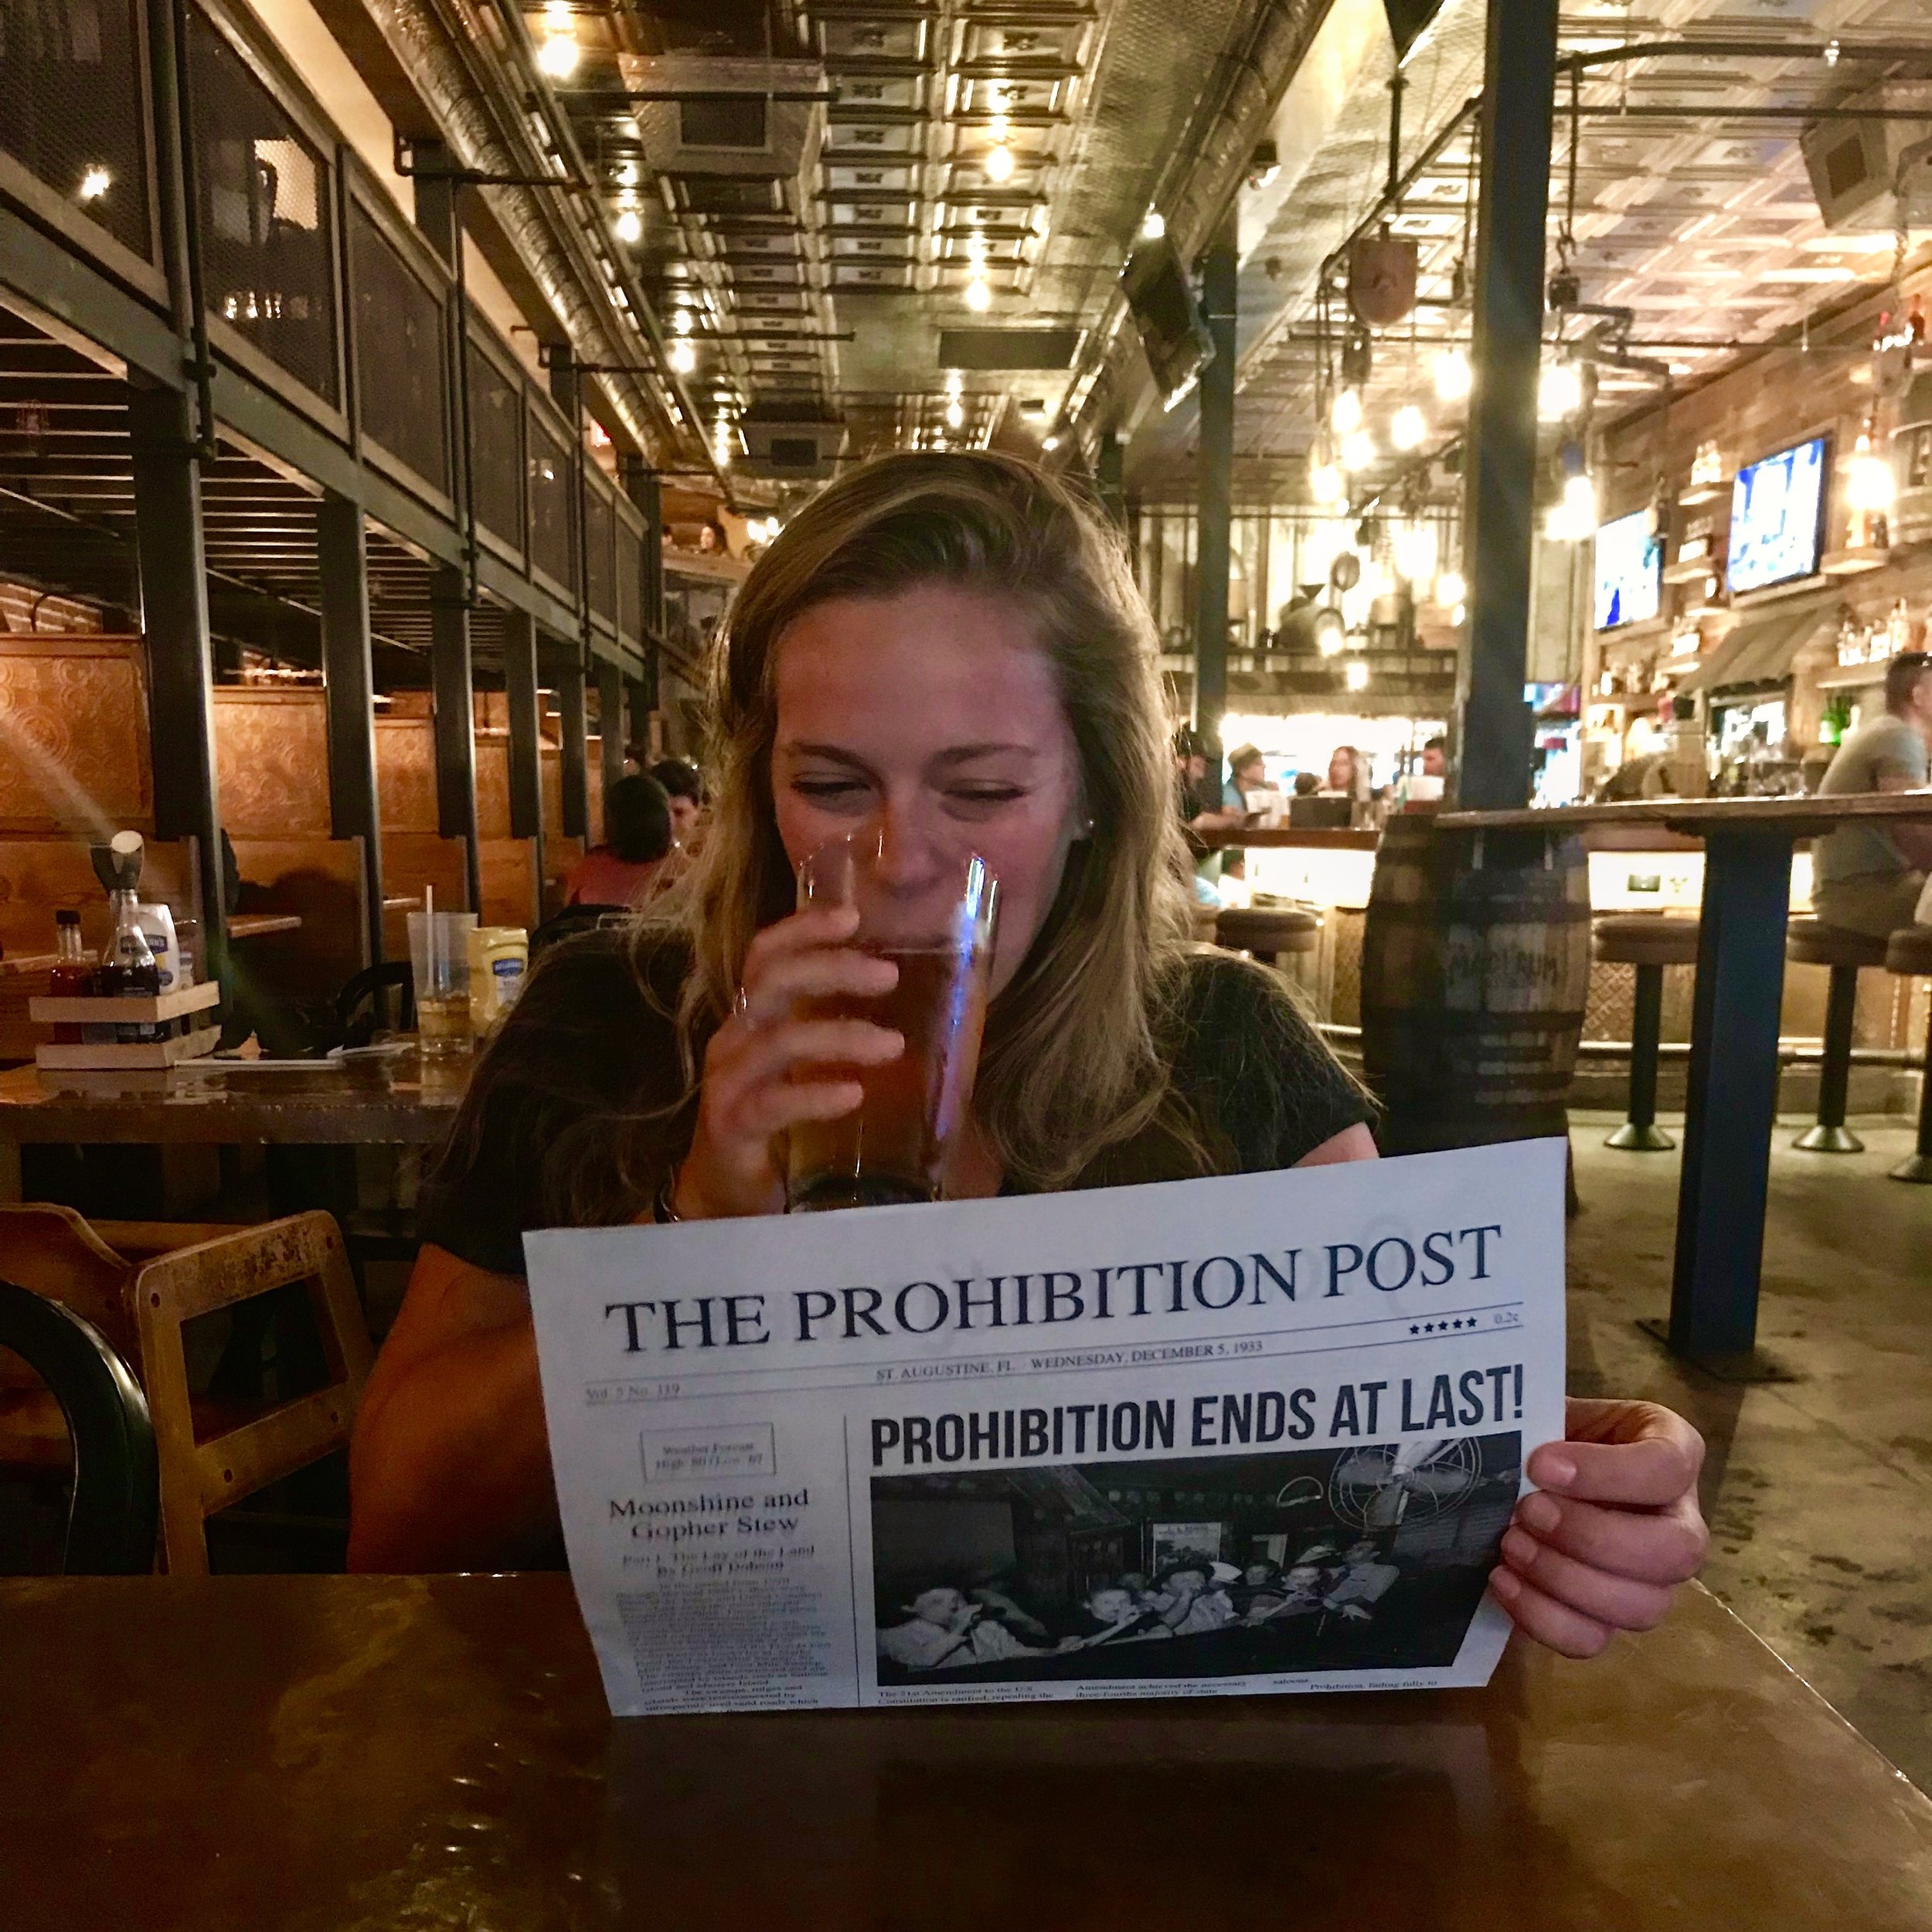 Hilary enjoying her first beer since the end of Prohibition!